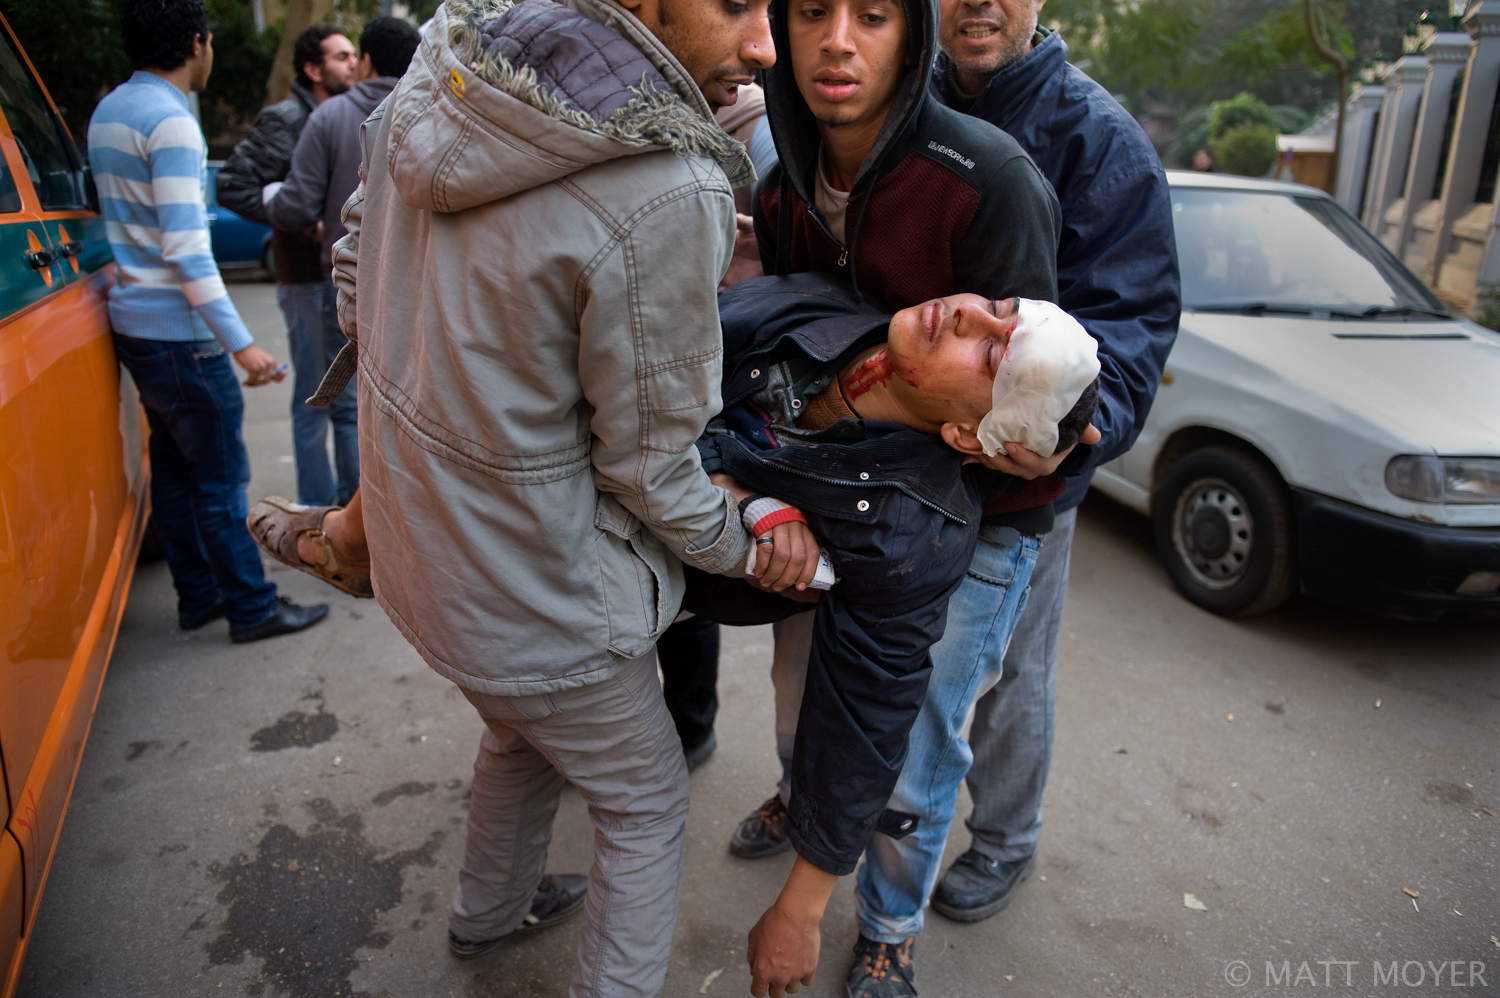  An Egyptian protester is rushed to an ambulance after being injured in clashes with government forces in Cairo, Egypt. 